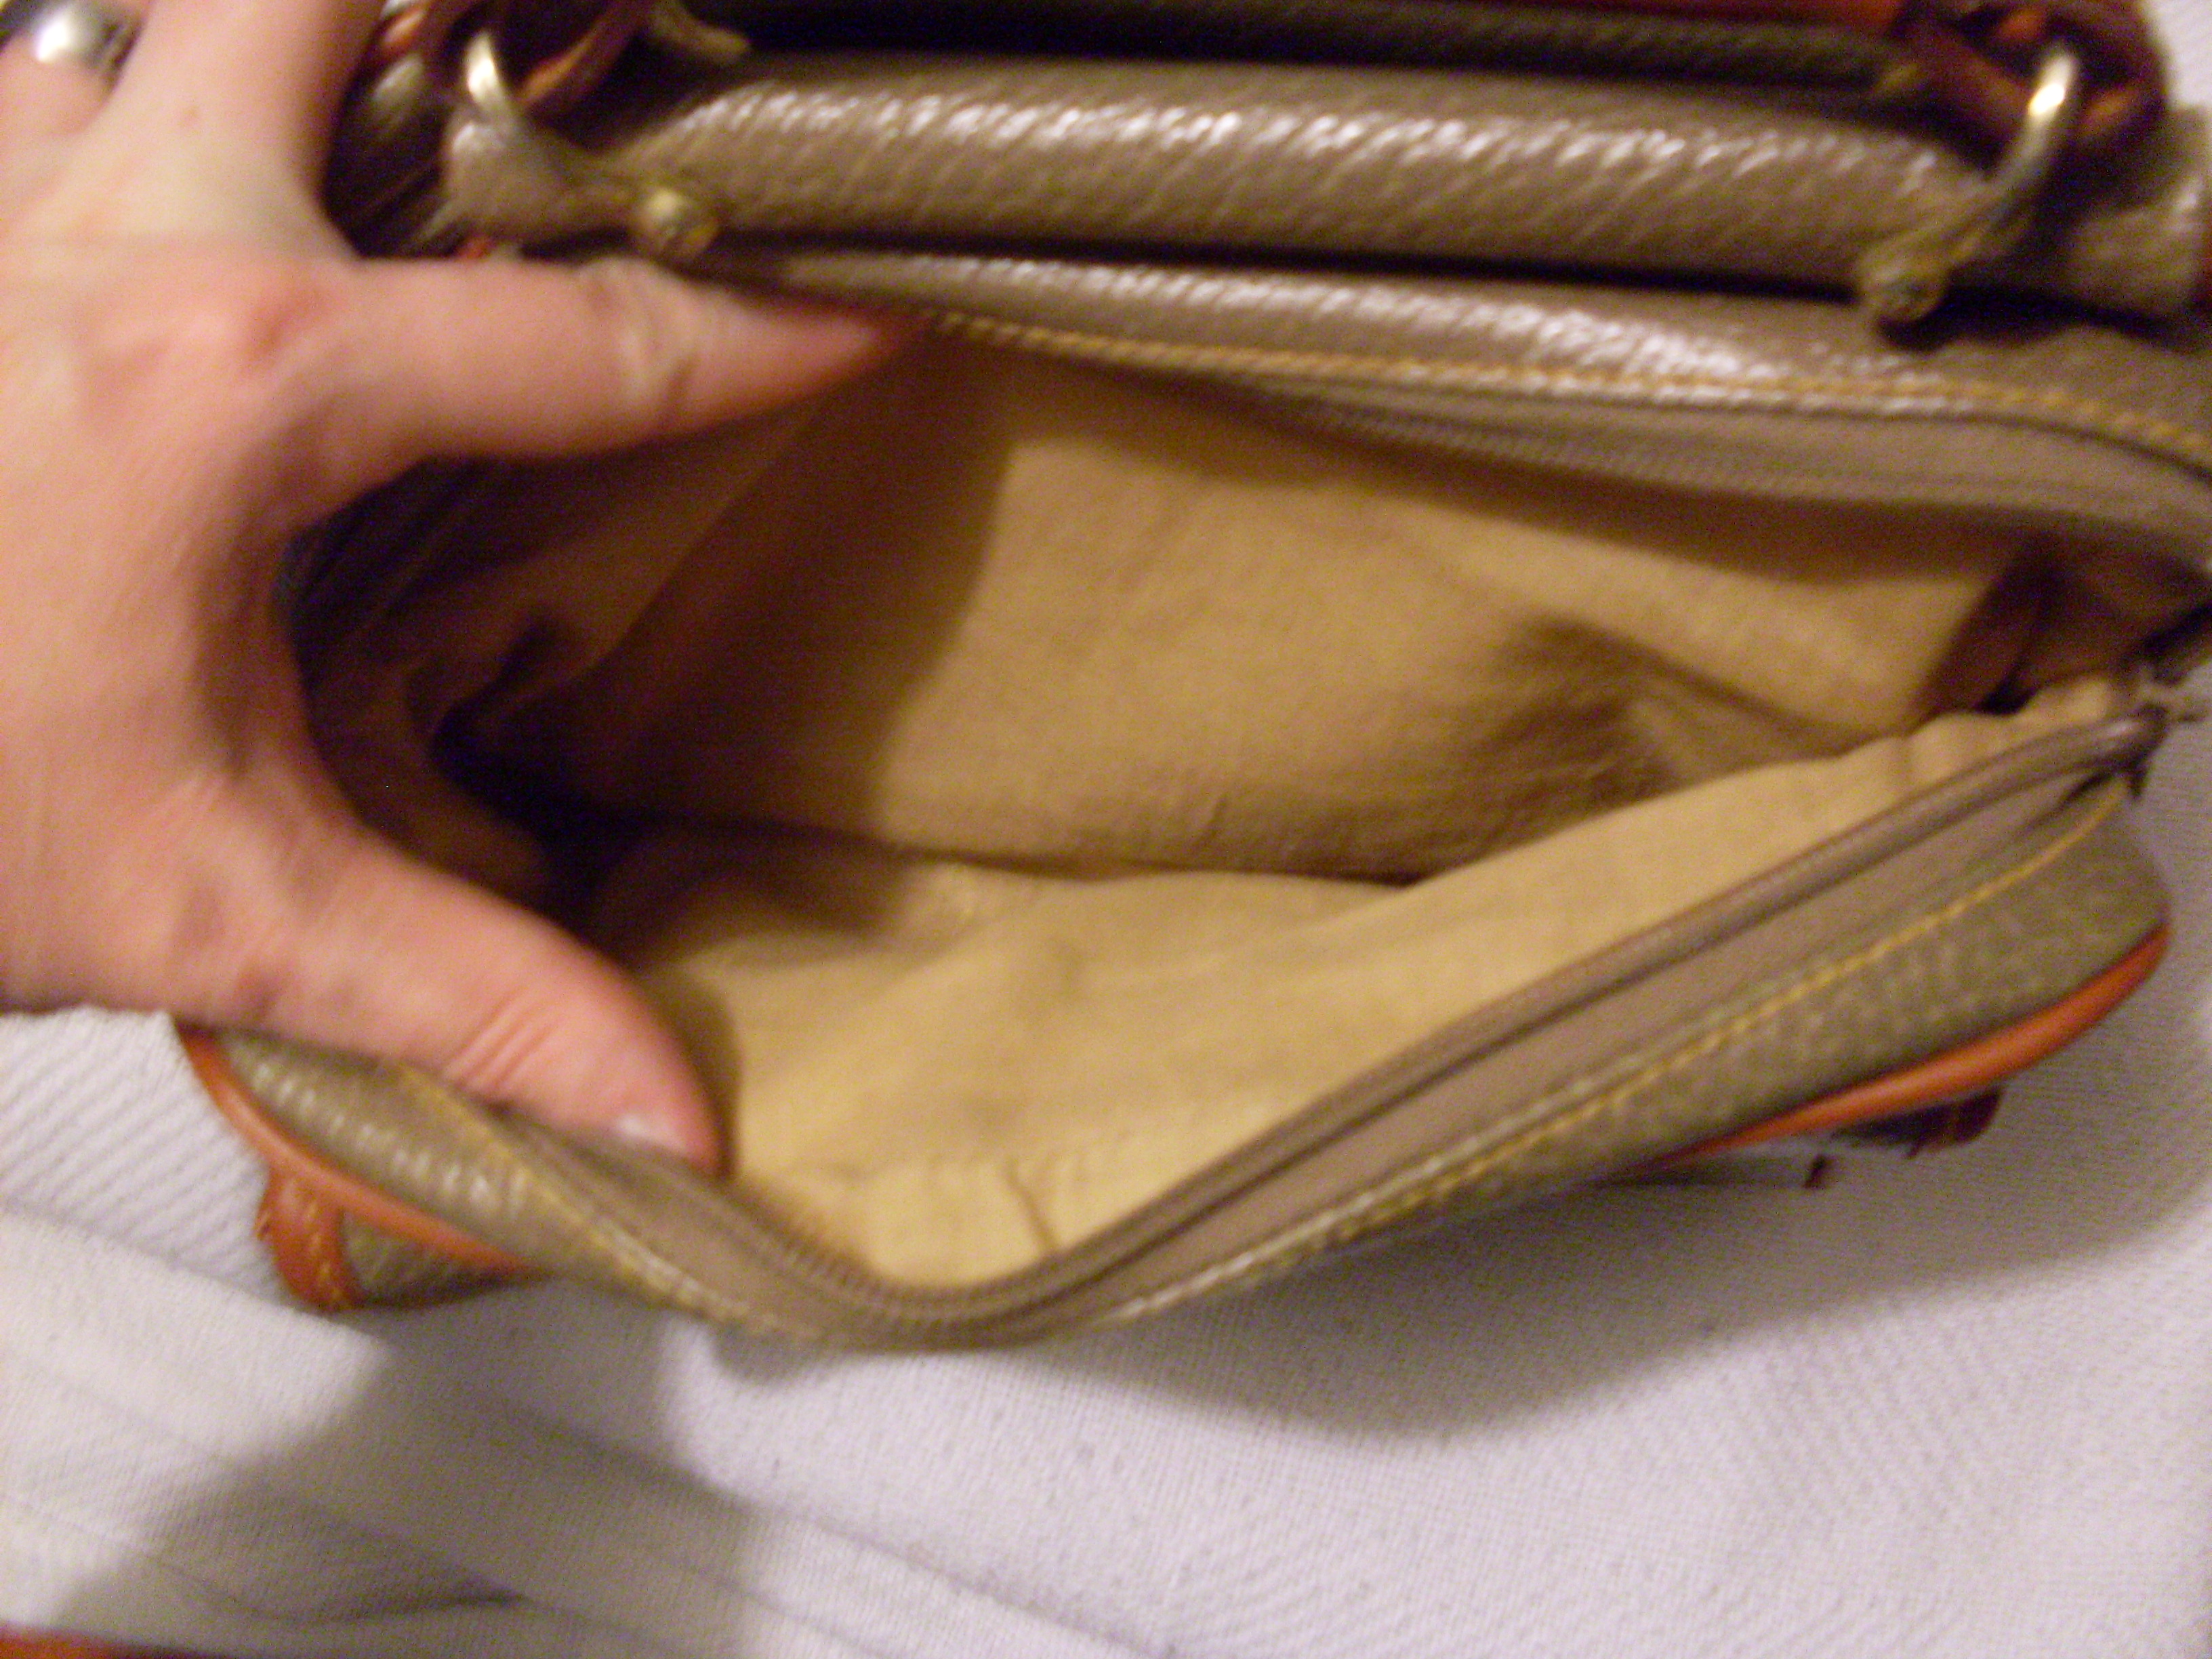 Is my Chanel wallet real or a superfake? What about my thrifted Dooney &  Bourke bags?